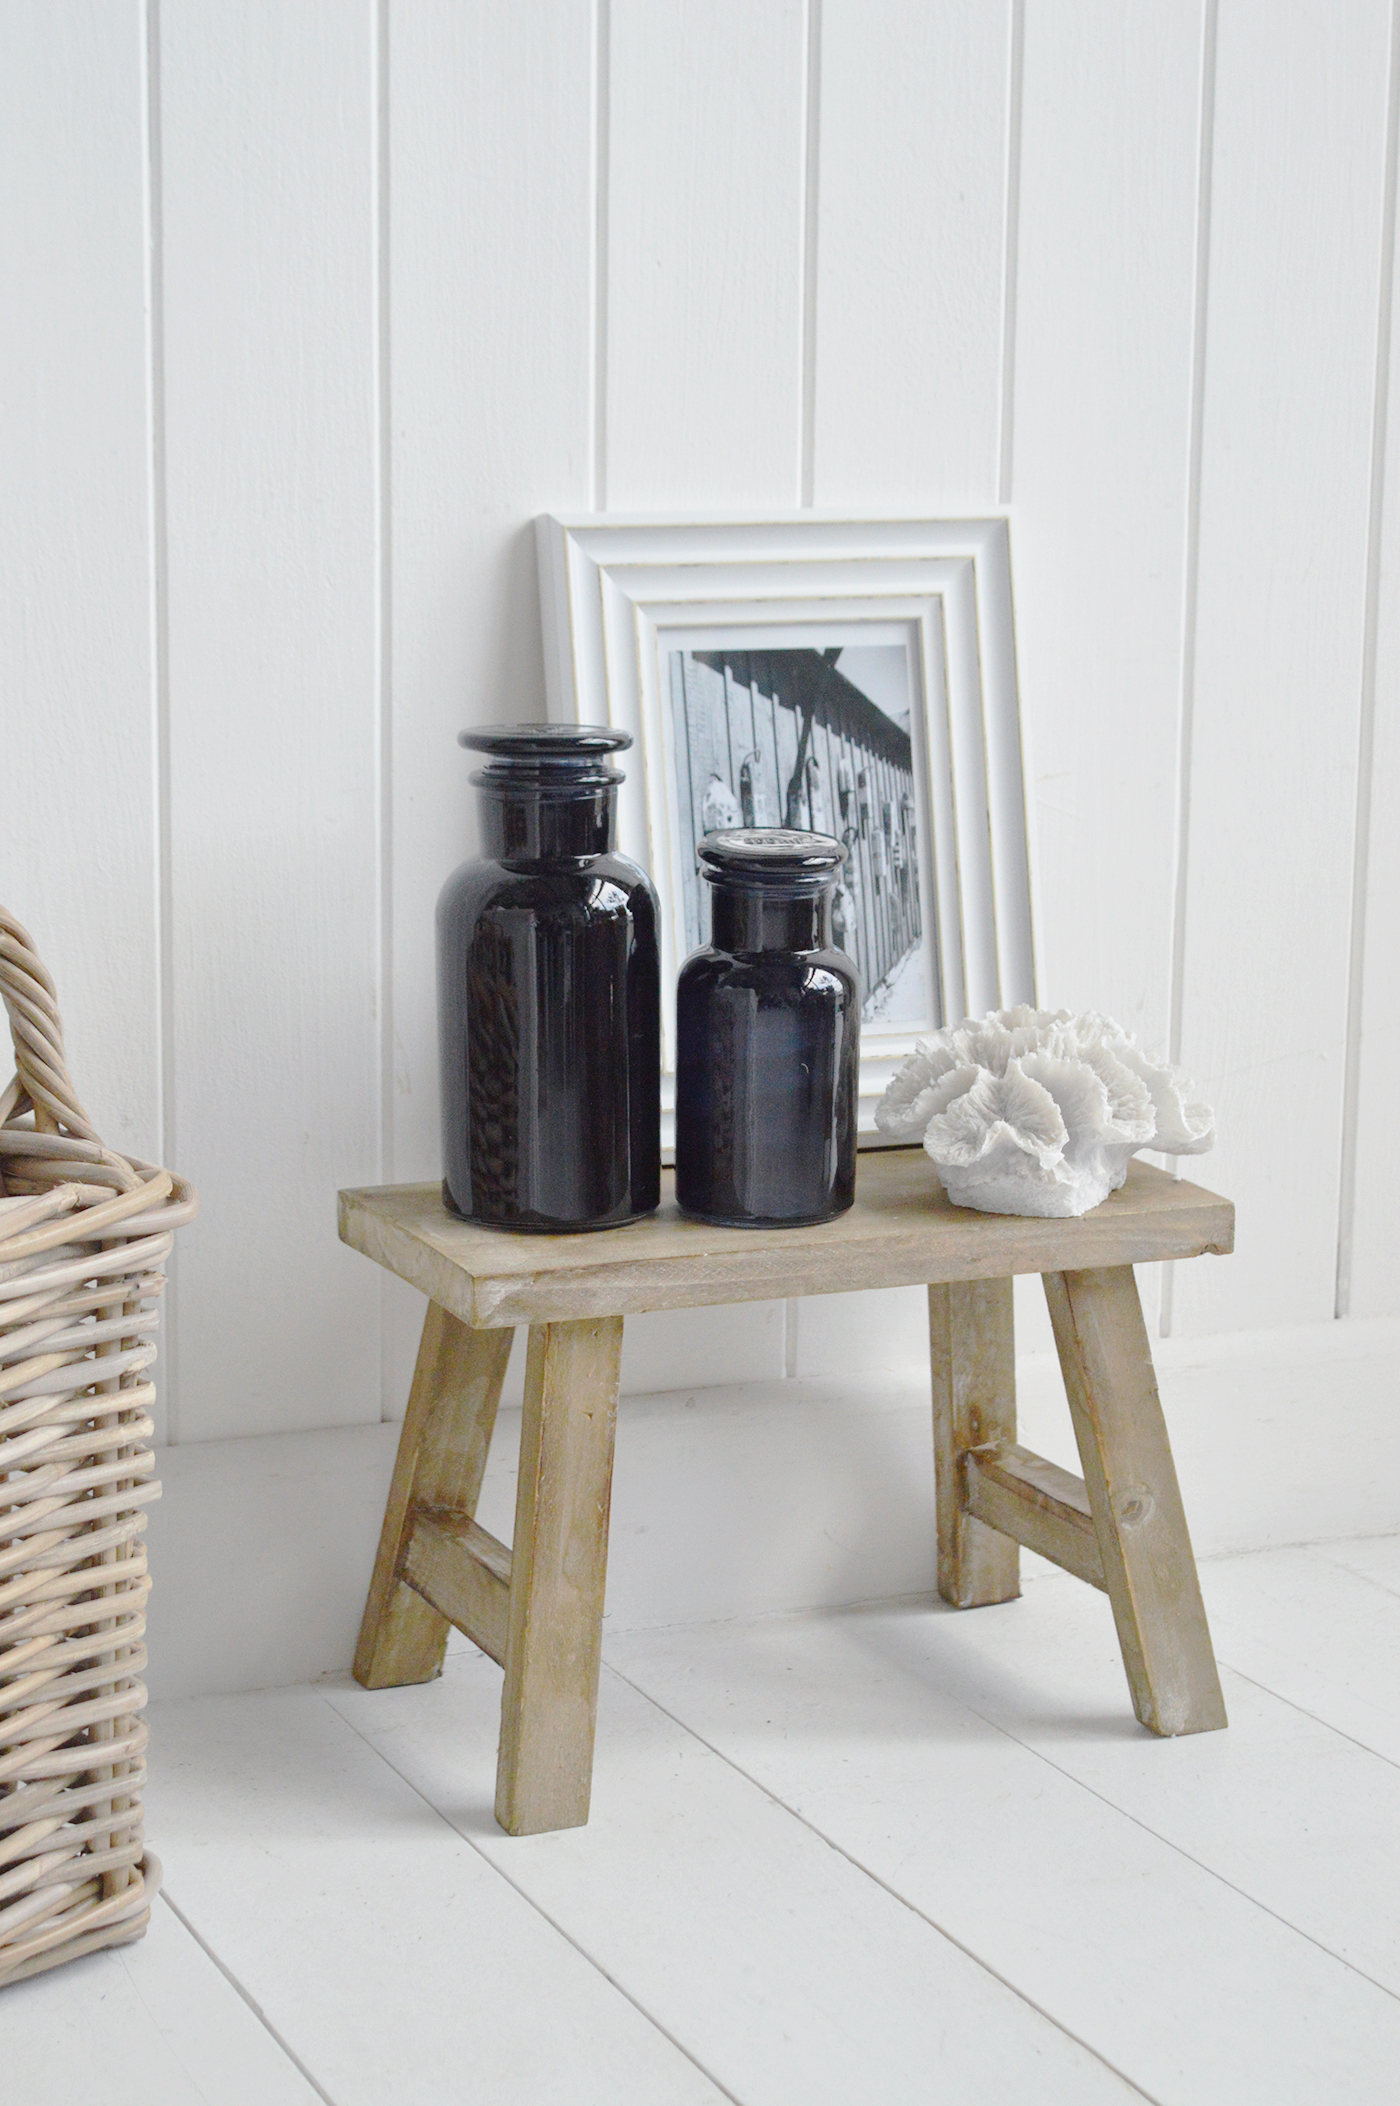 The Pawtucket rustic small wooden stool for home interiors. Styled with faux corak, apothecarf baootles and a photo frame for height